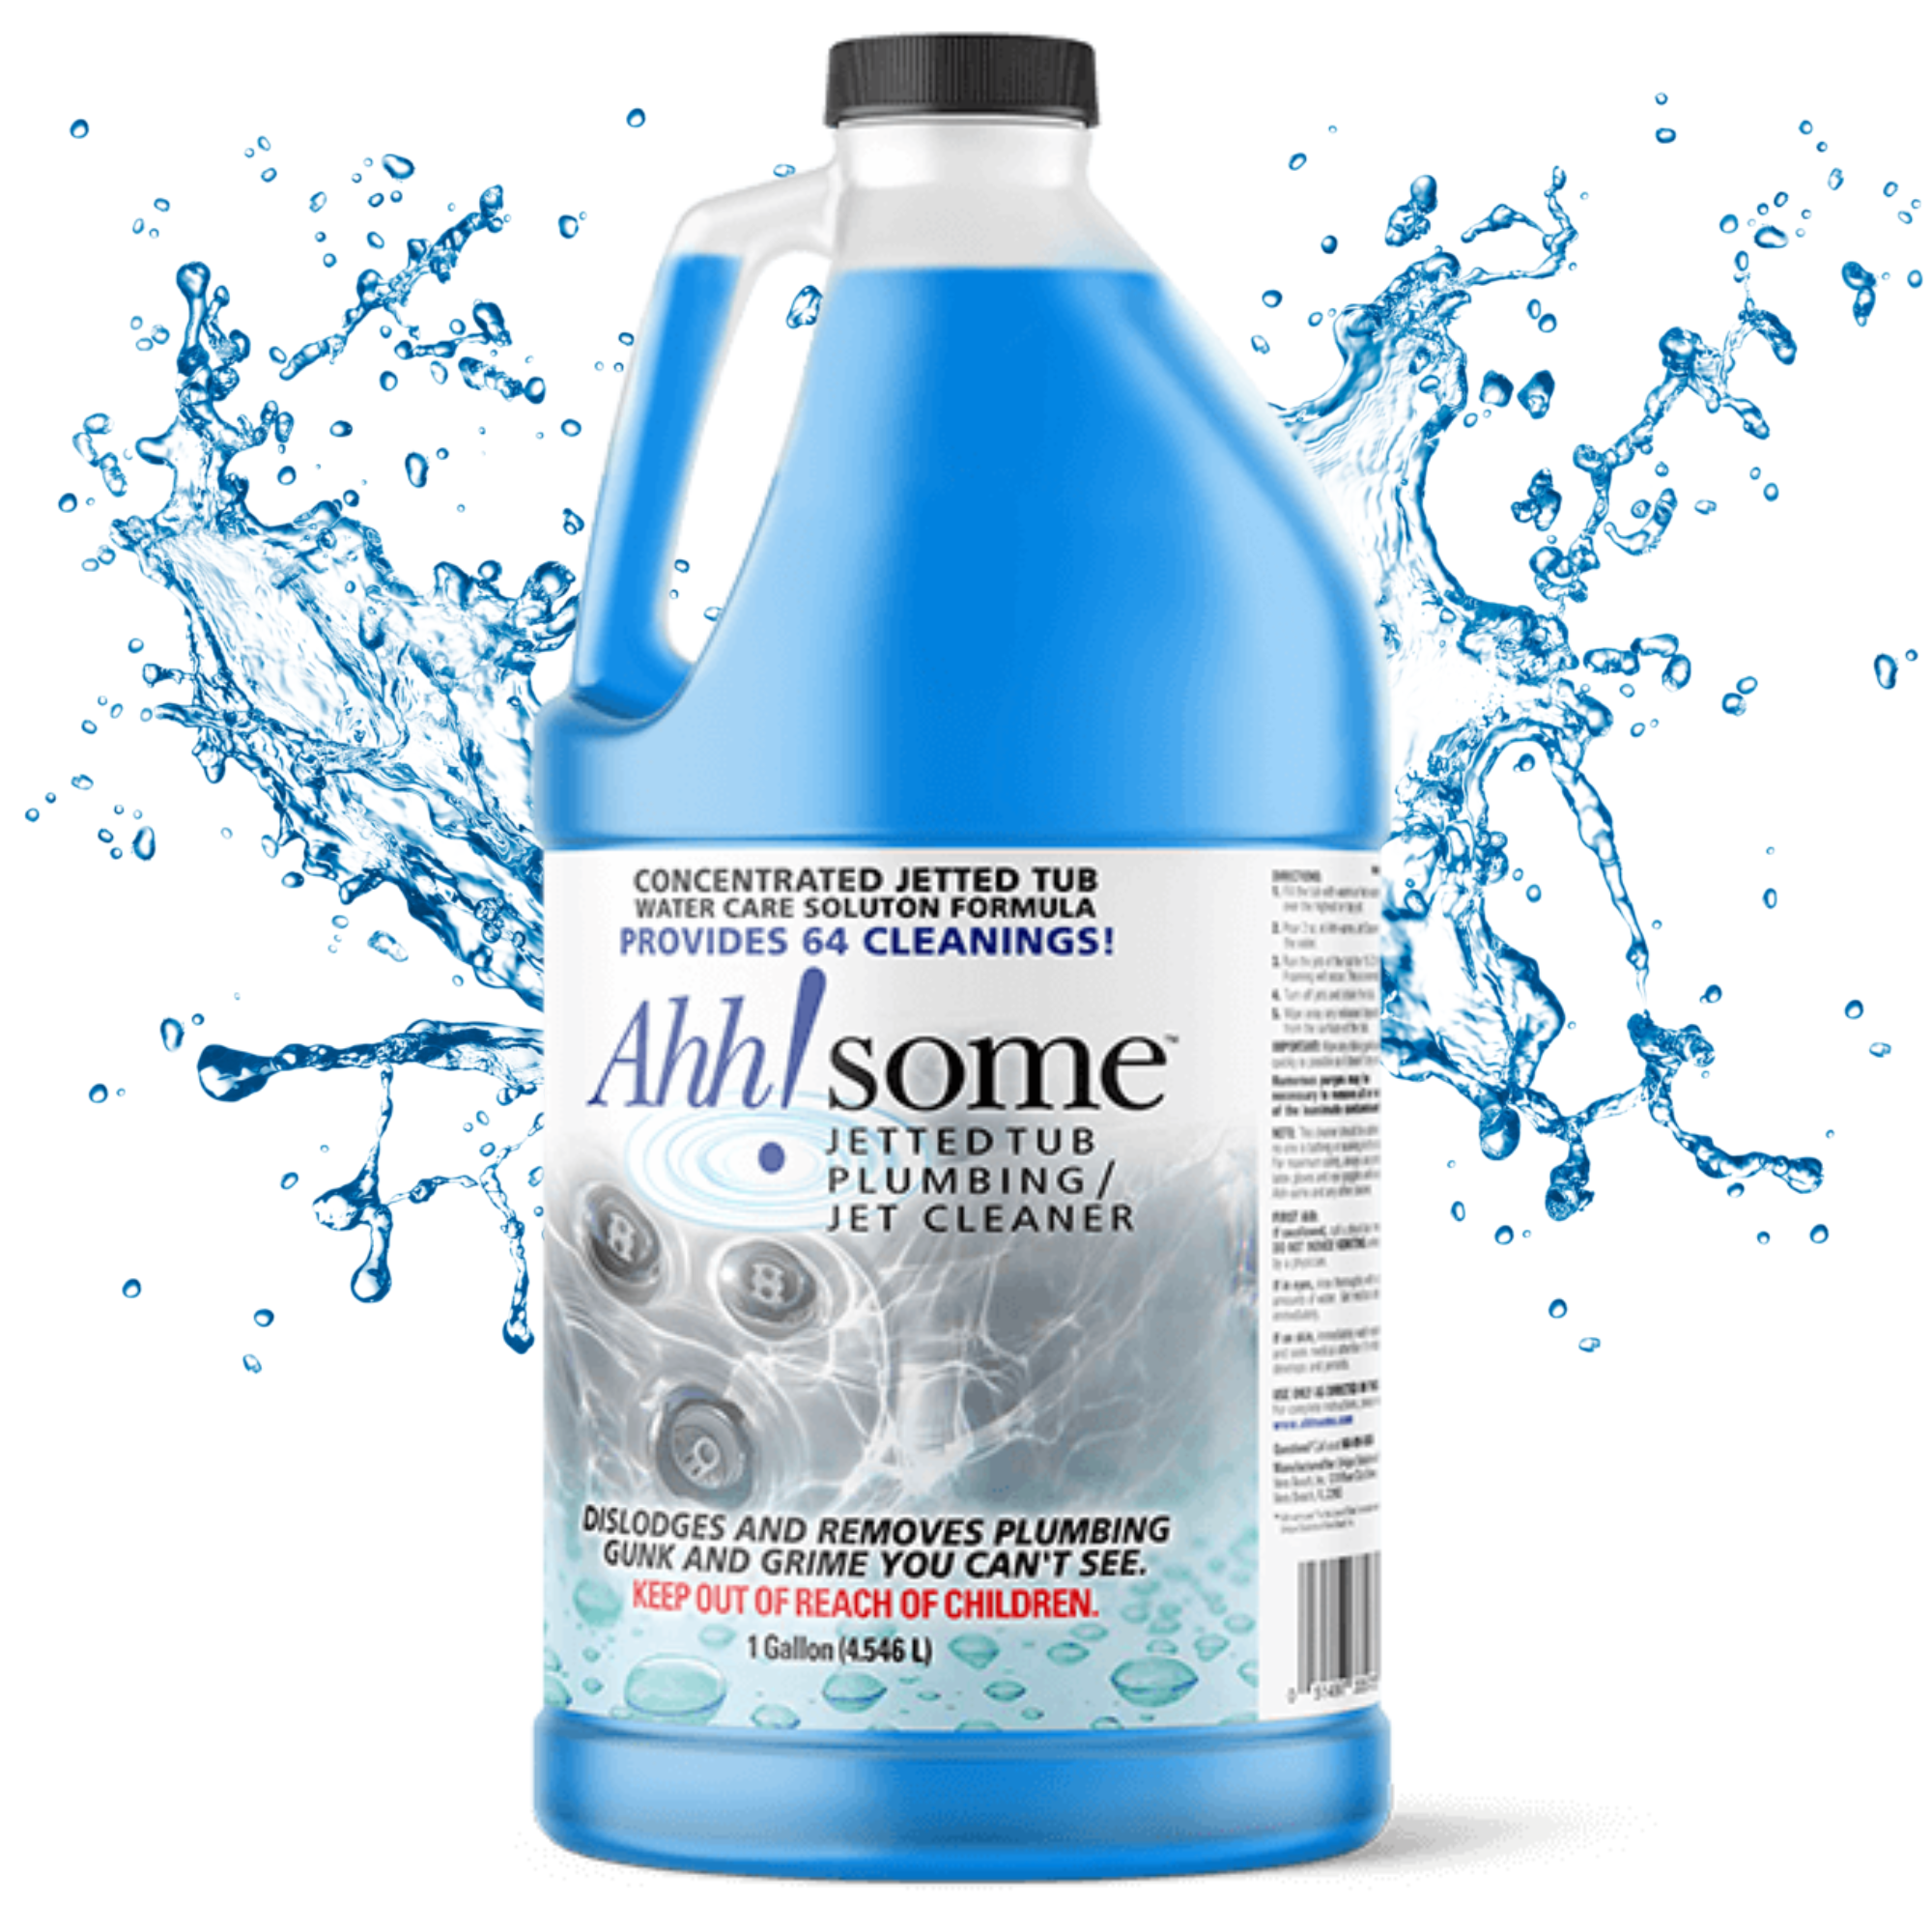 Ahh-Some- Hot Tub Cleaner, Clean Pipes & Jets Gunk Build Up | Clear &  Soften Water For Jetted Tub or Swim Spa | Top Water Clarifier 6 oz